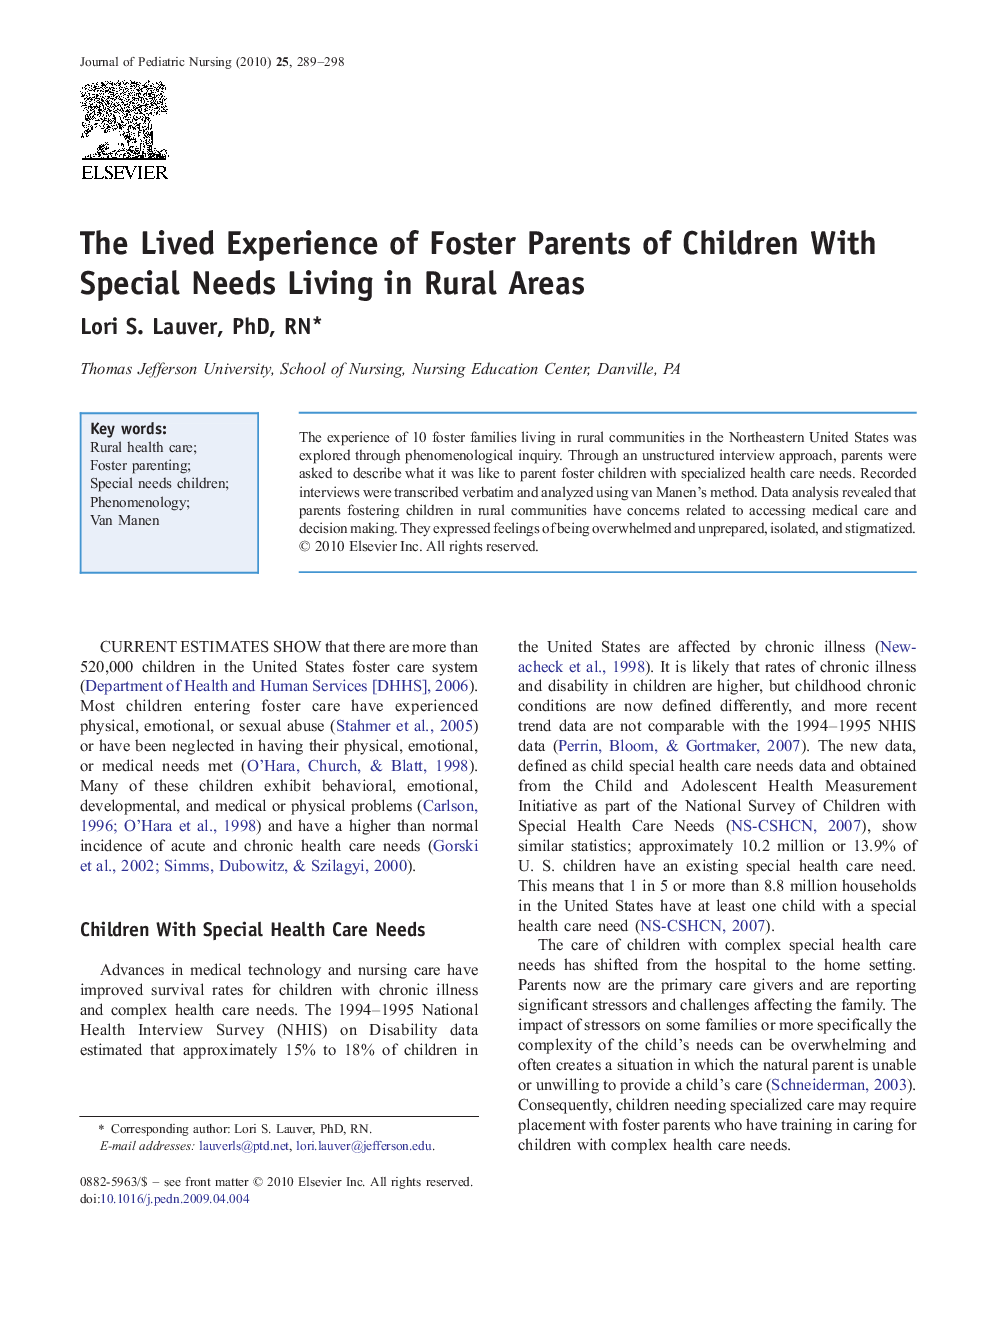 The Lived Experience of Foster Parents of Children With Special Needs Living in Rural Areas